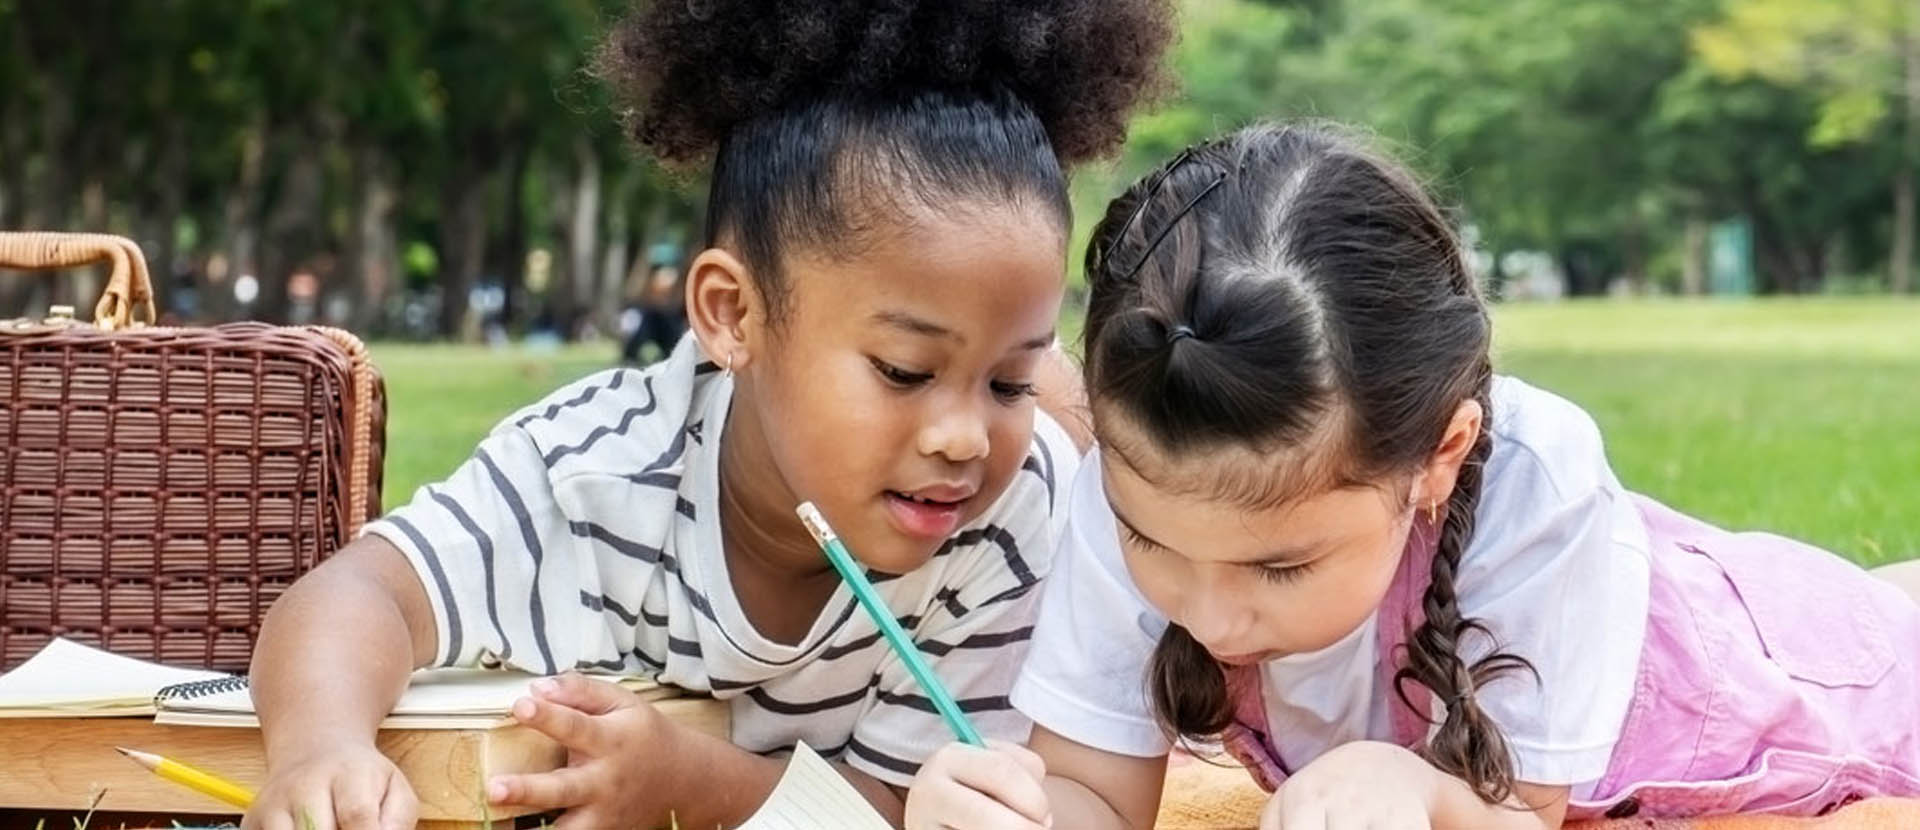 7 Reasons to Keep Your Child Learning This Summer